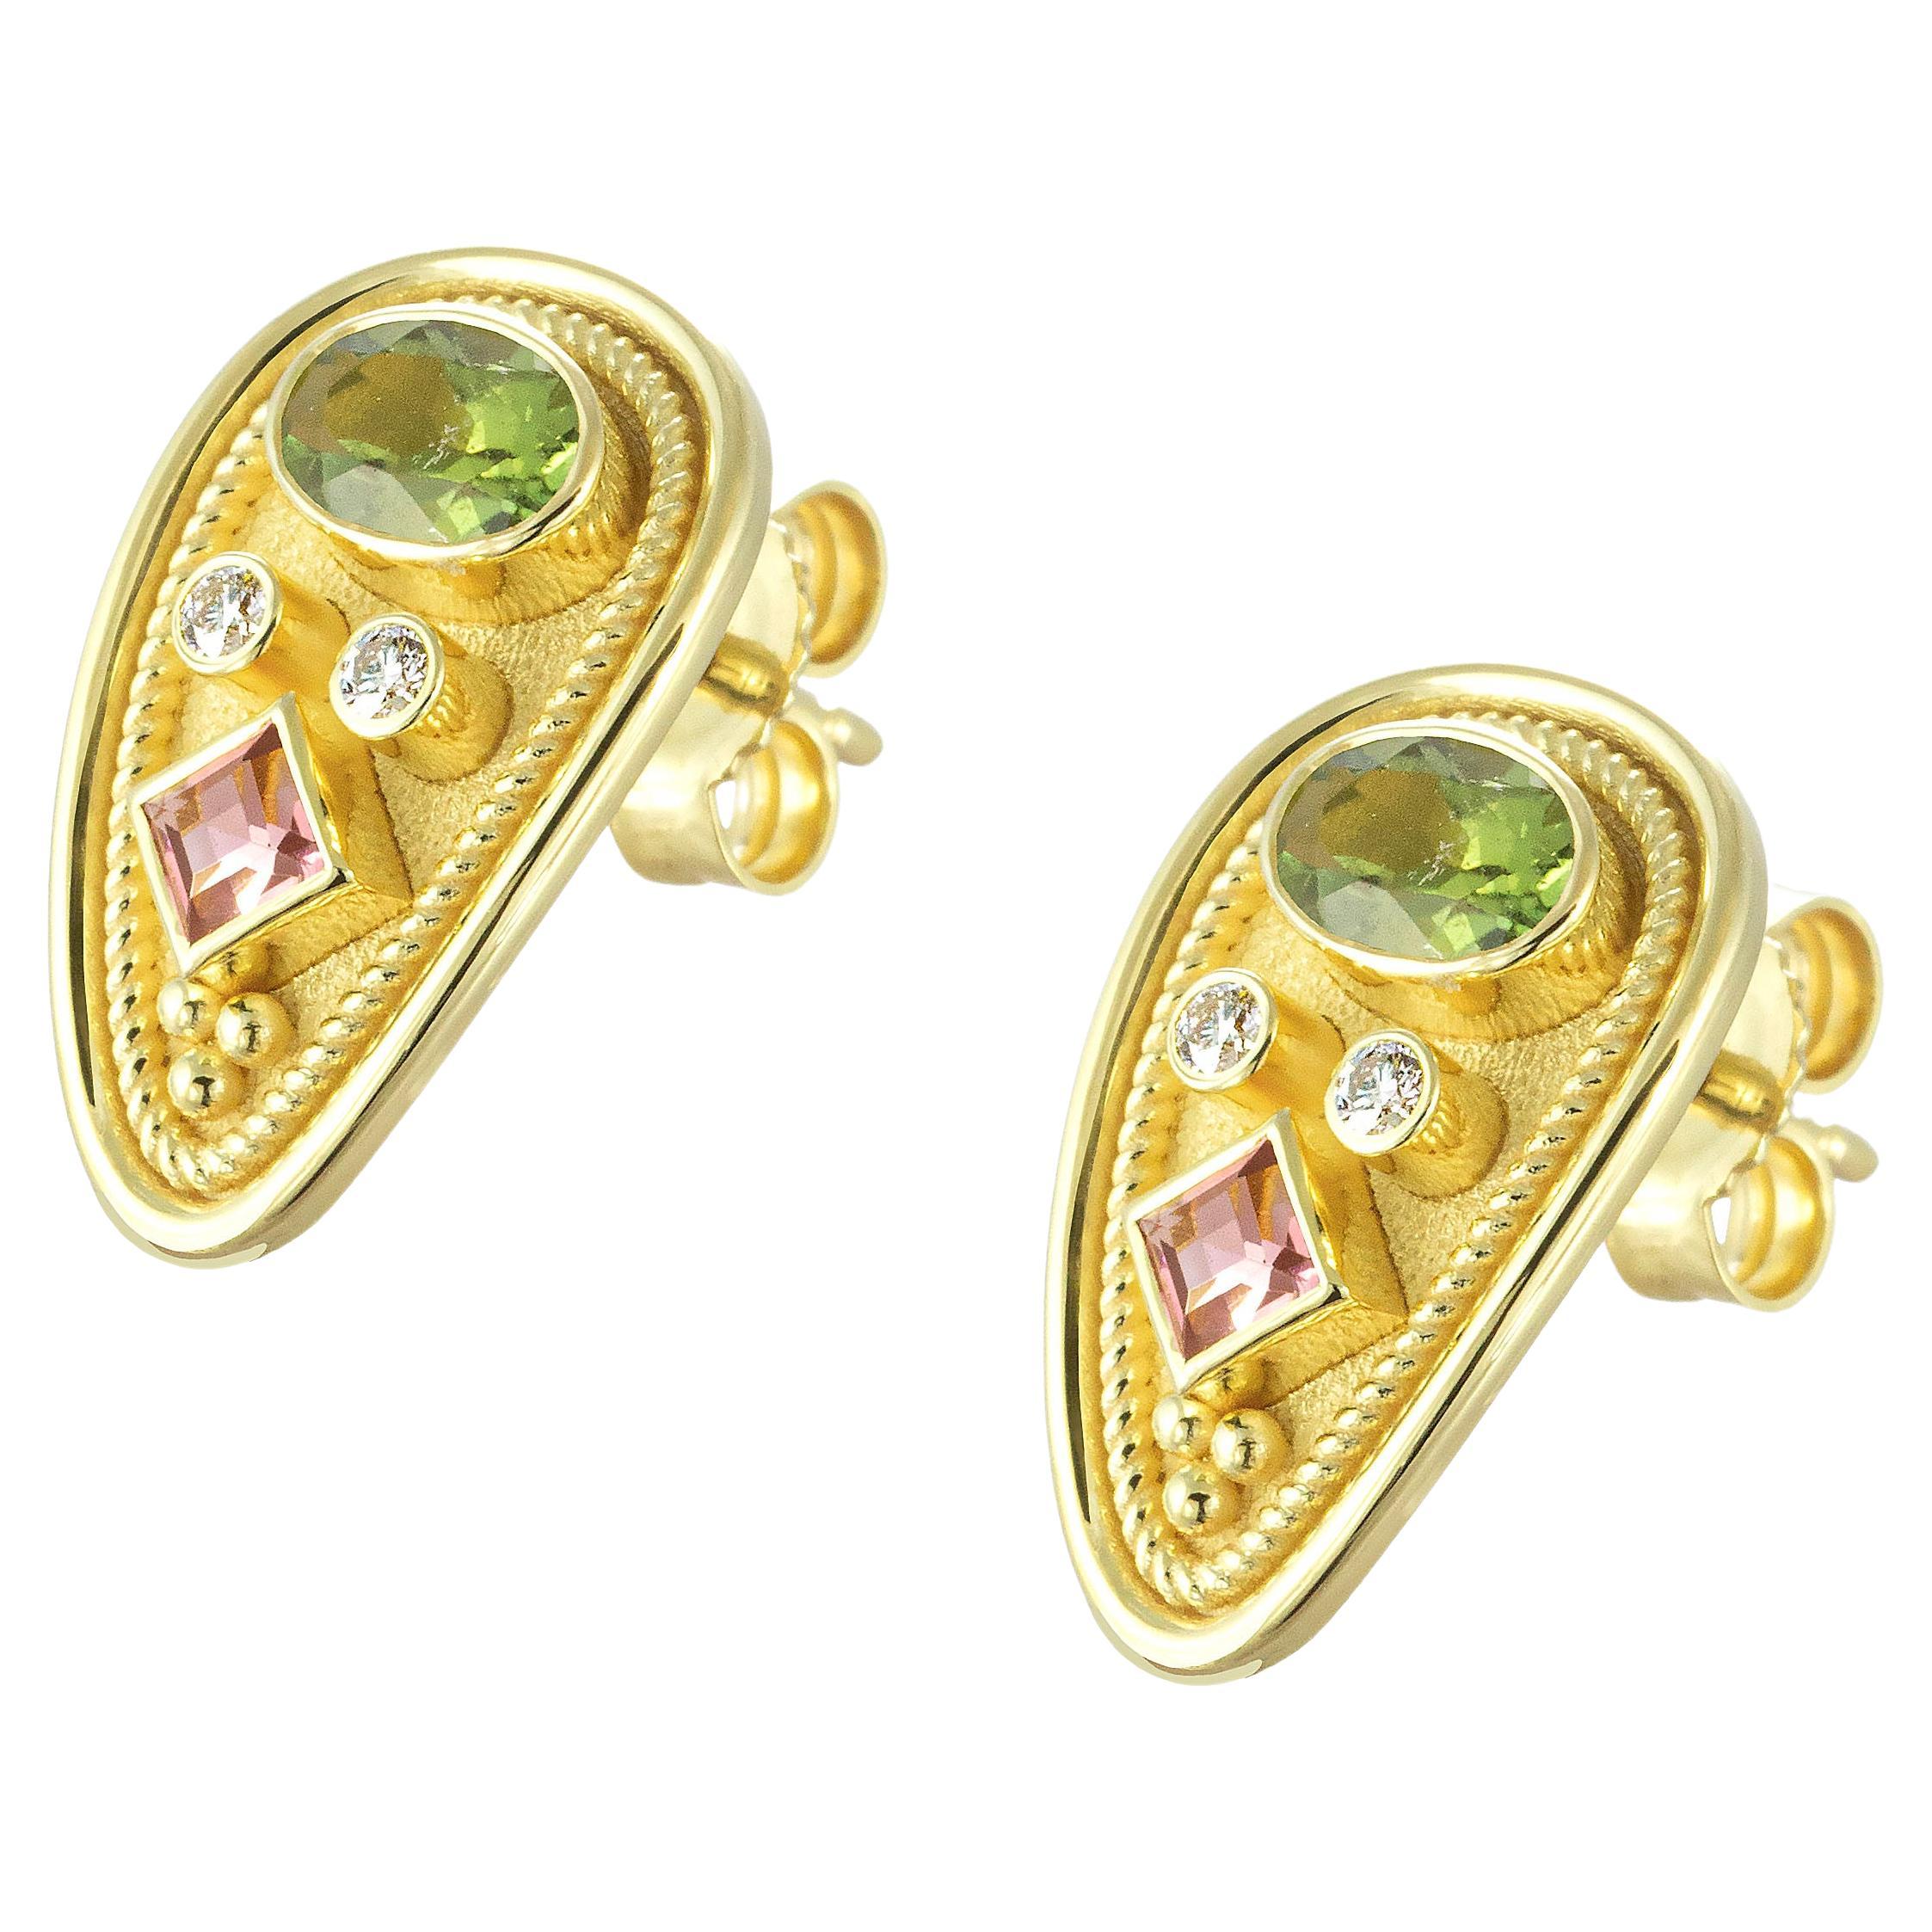 Byzantine Gold Earrings with Tourmalines and Diamonds